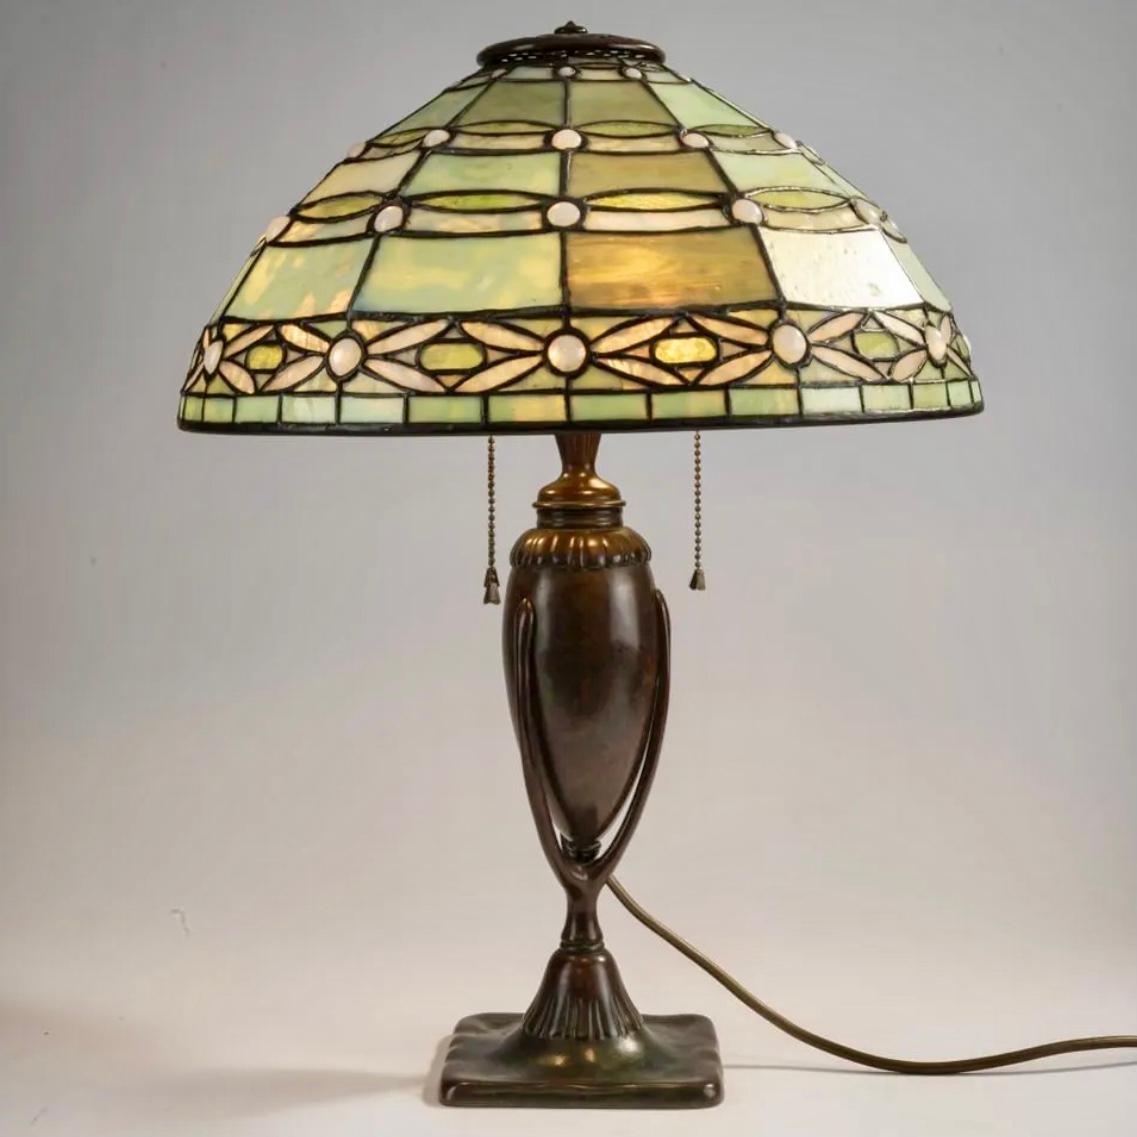 Cast Tiffany Studios Jeweled Blossom Table Lamp For Sale